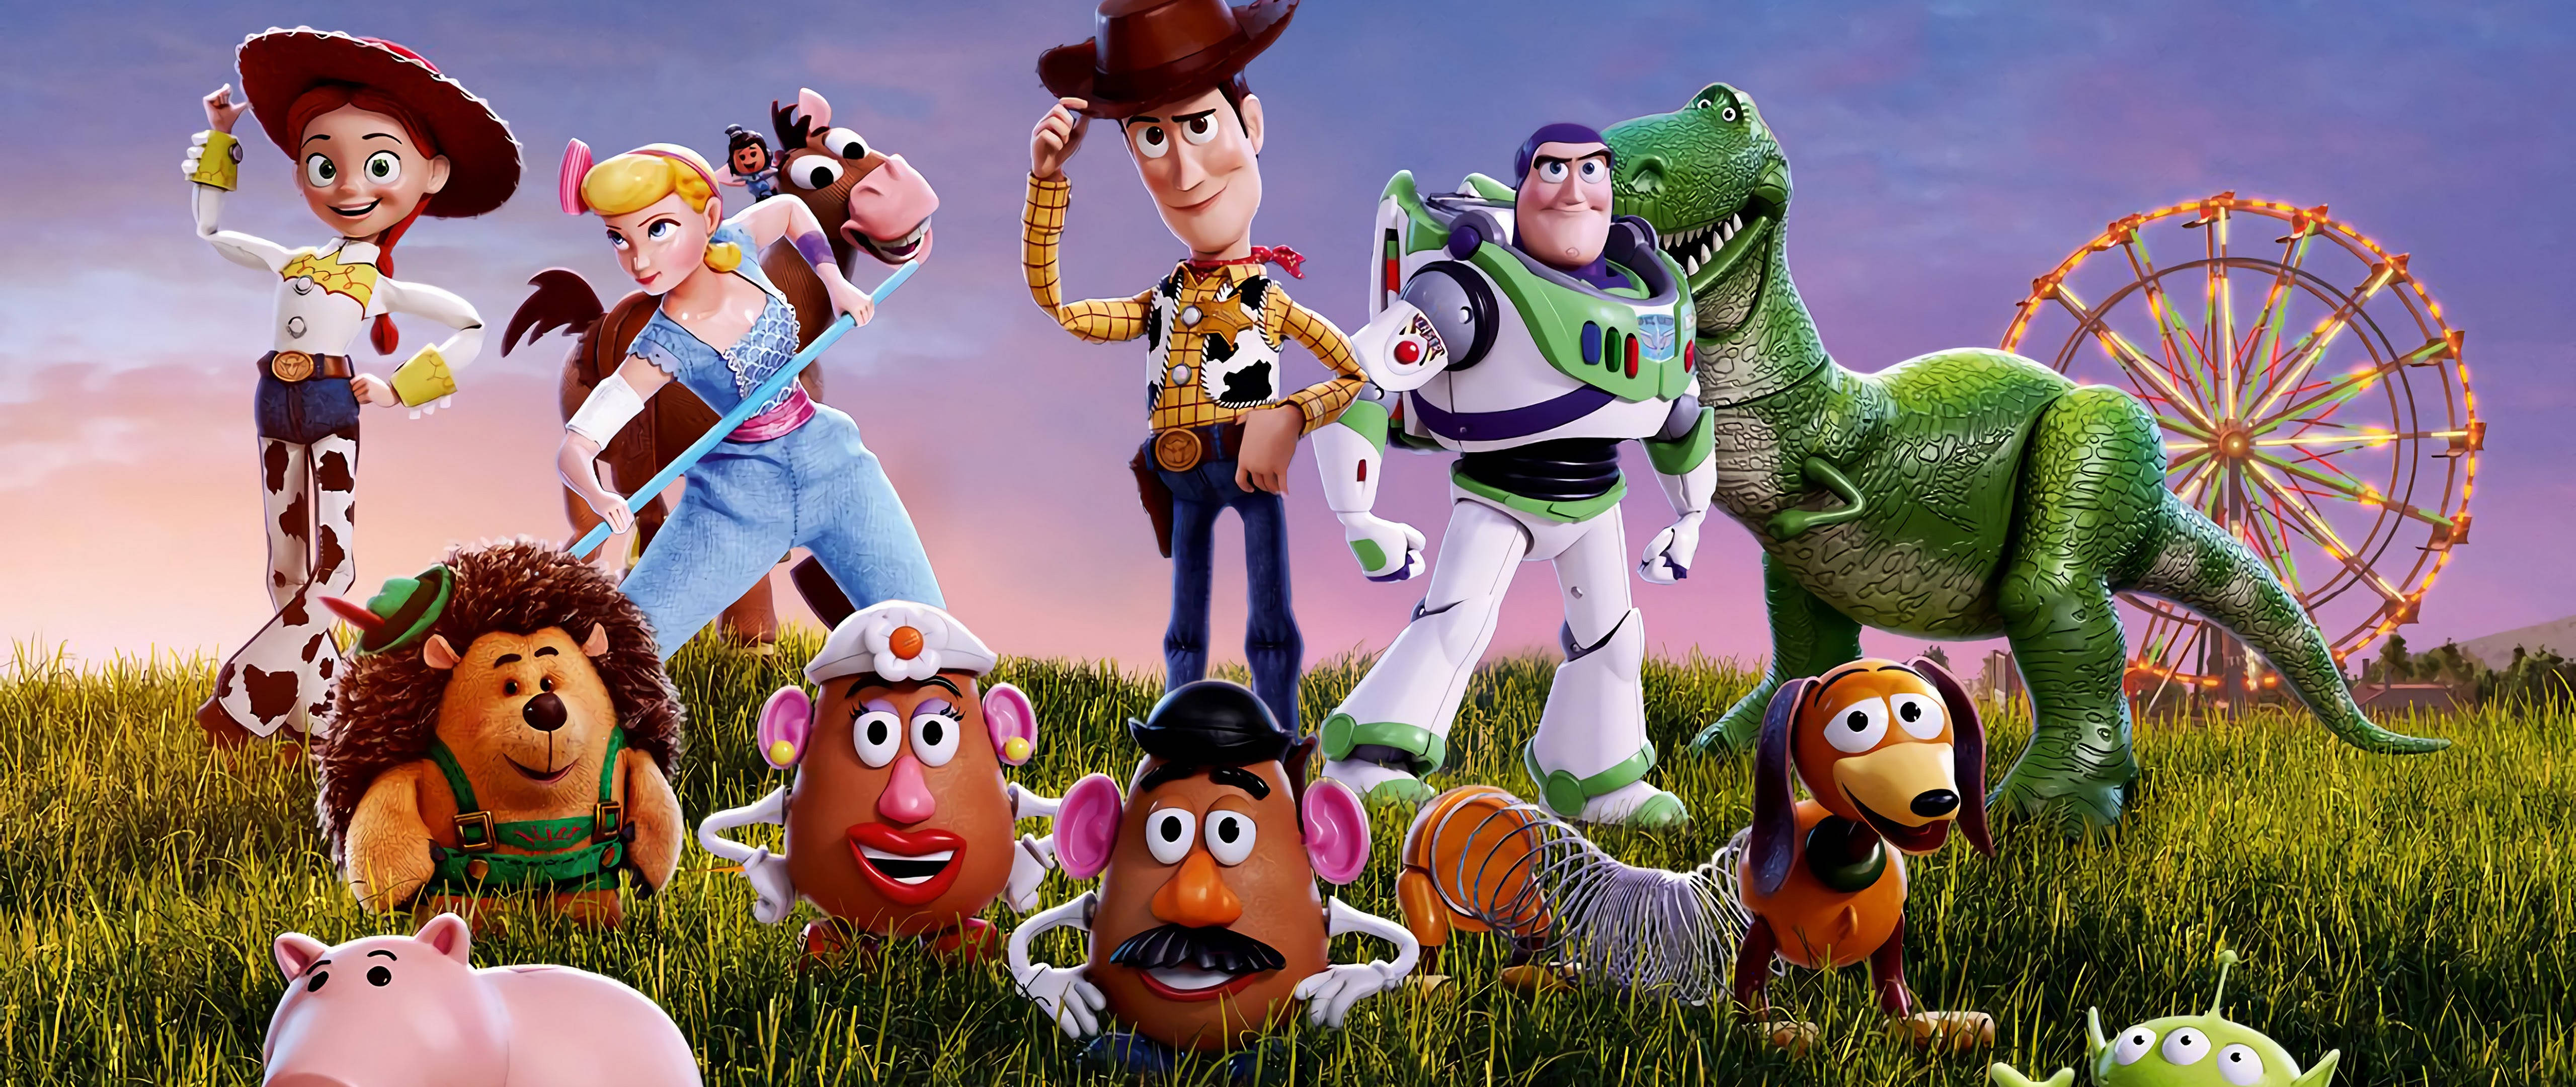 Toy Story 4 Characters Artwork Background